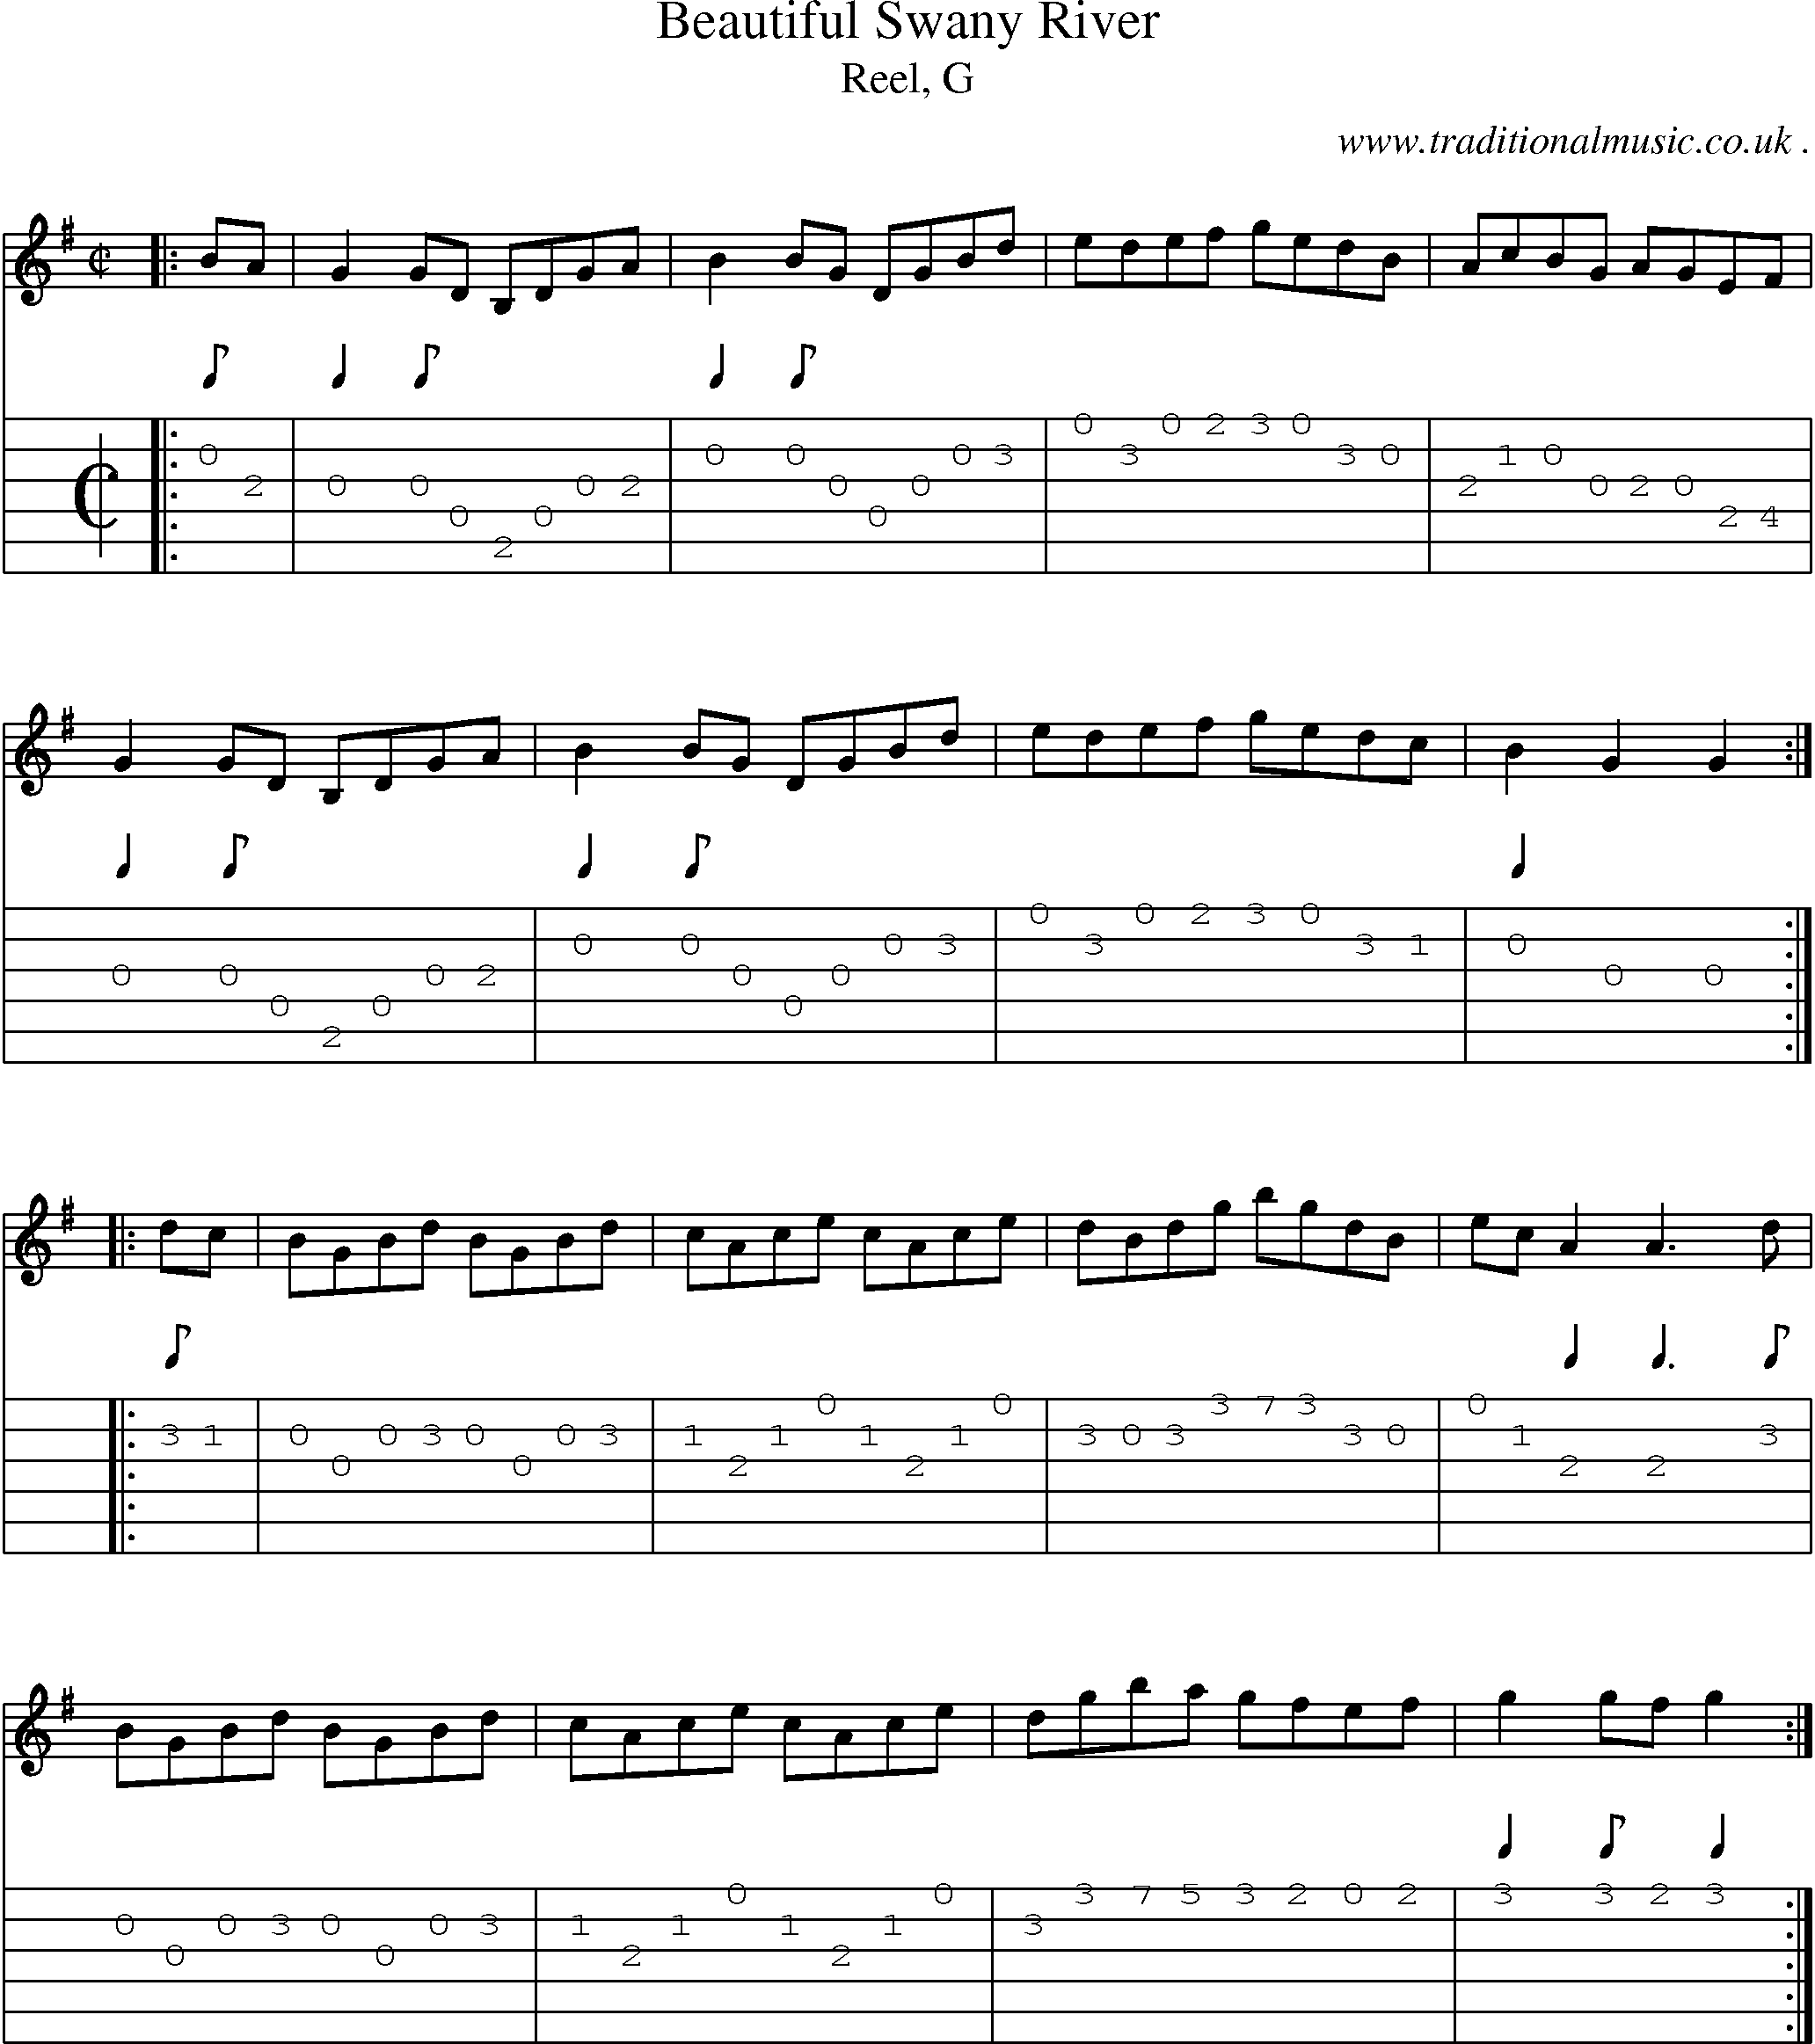 Sheet-music  score, Chords and Guitar Tabs for Beautiful Swany River